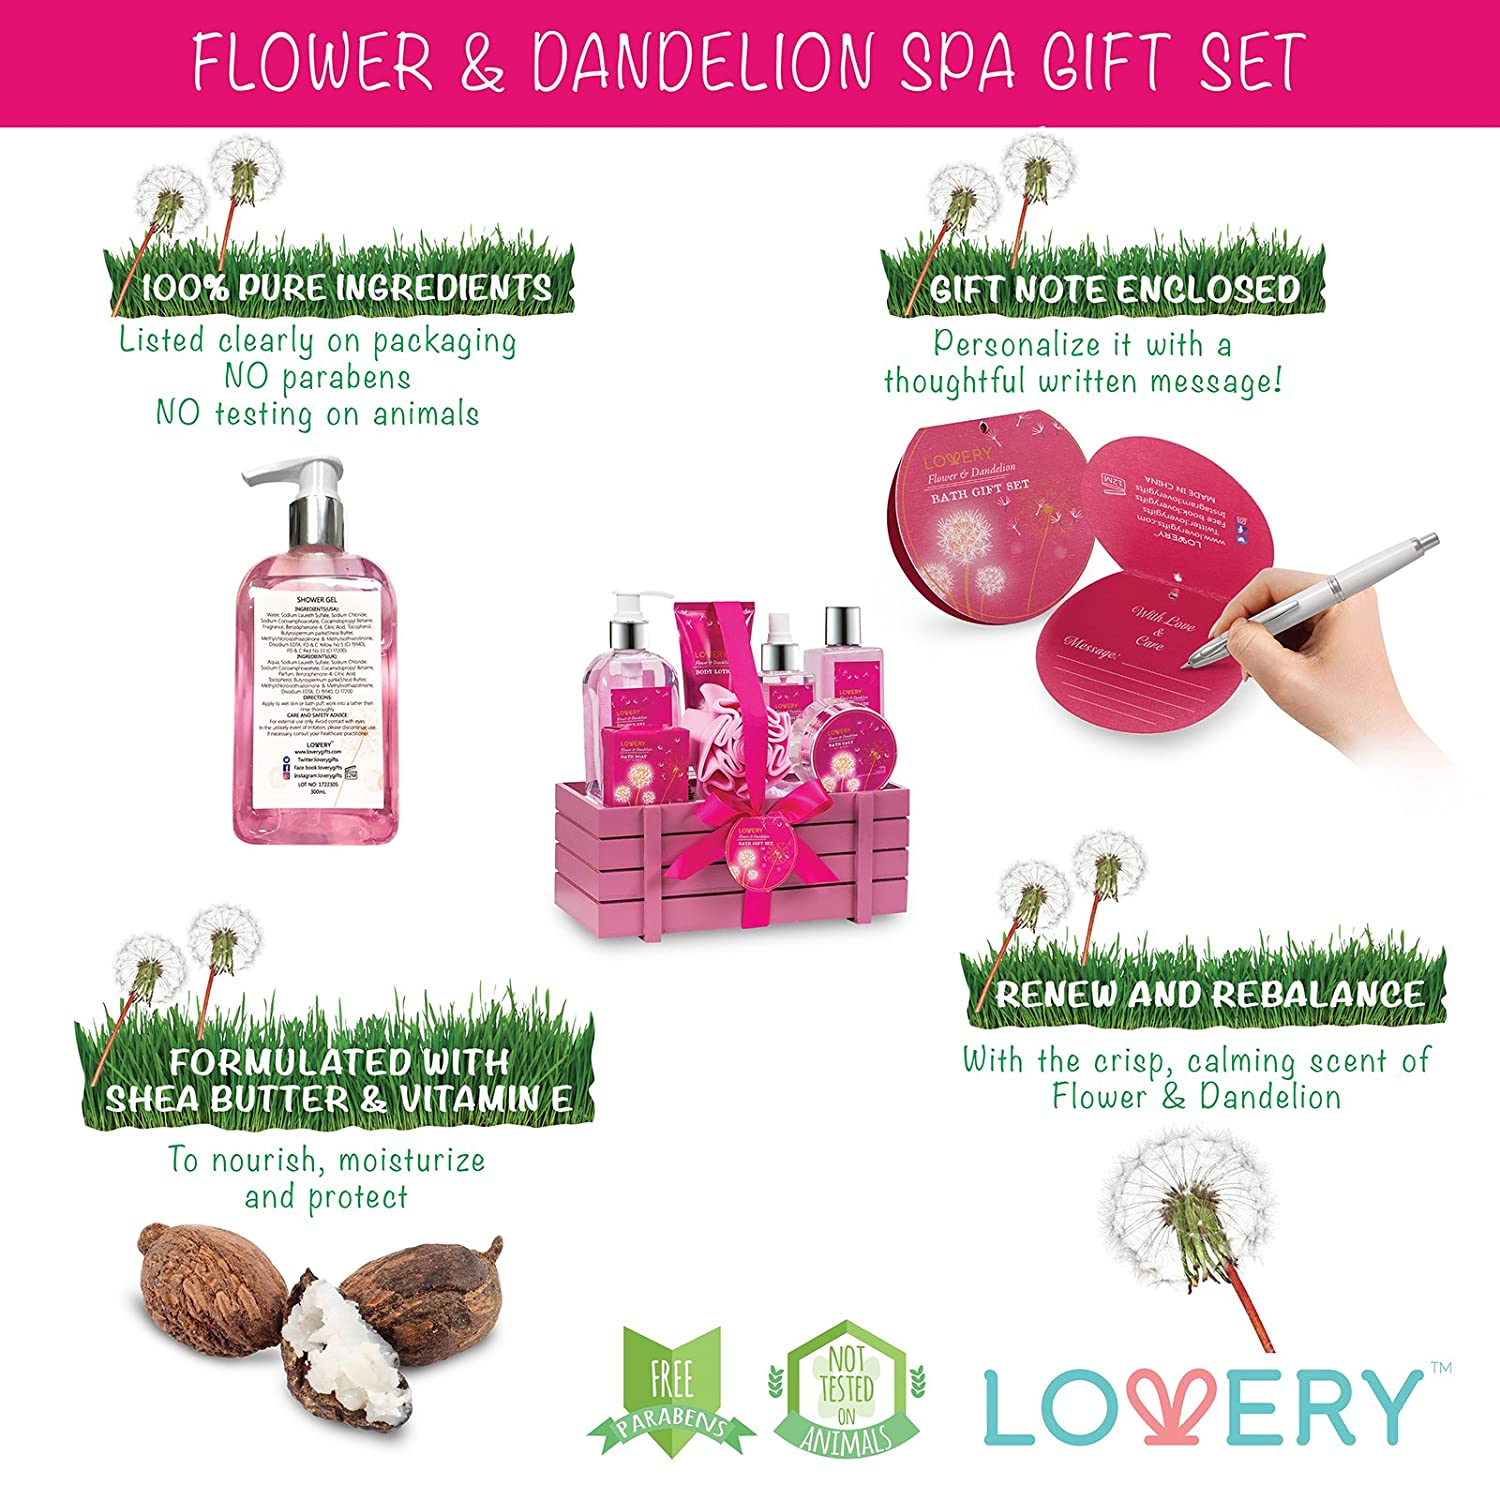 Lovery Flower and Dandelion Body Care Set, Flower Gift Set, Dandelion Gift Set, Spa Relaxing Gift, Spa Treatment, Body Cosmetics, All Natural, Vitamin E, Shea Butter, Self-Care Package, Hydrating Skin Care, Perfect Gift, Spa Set 